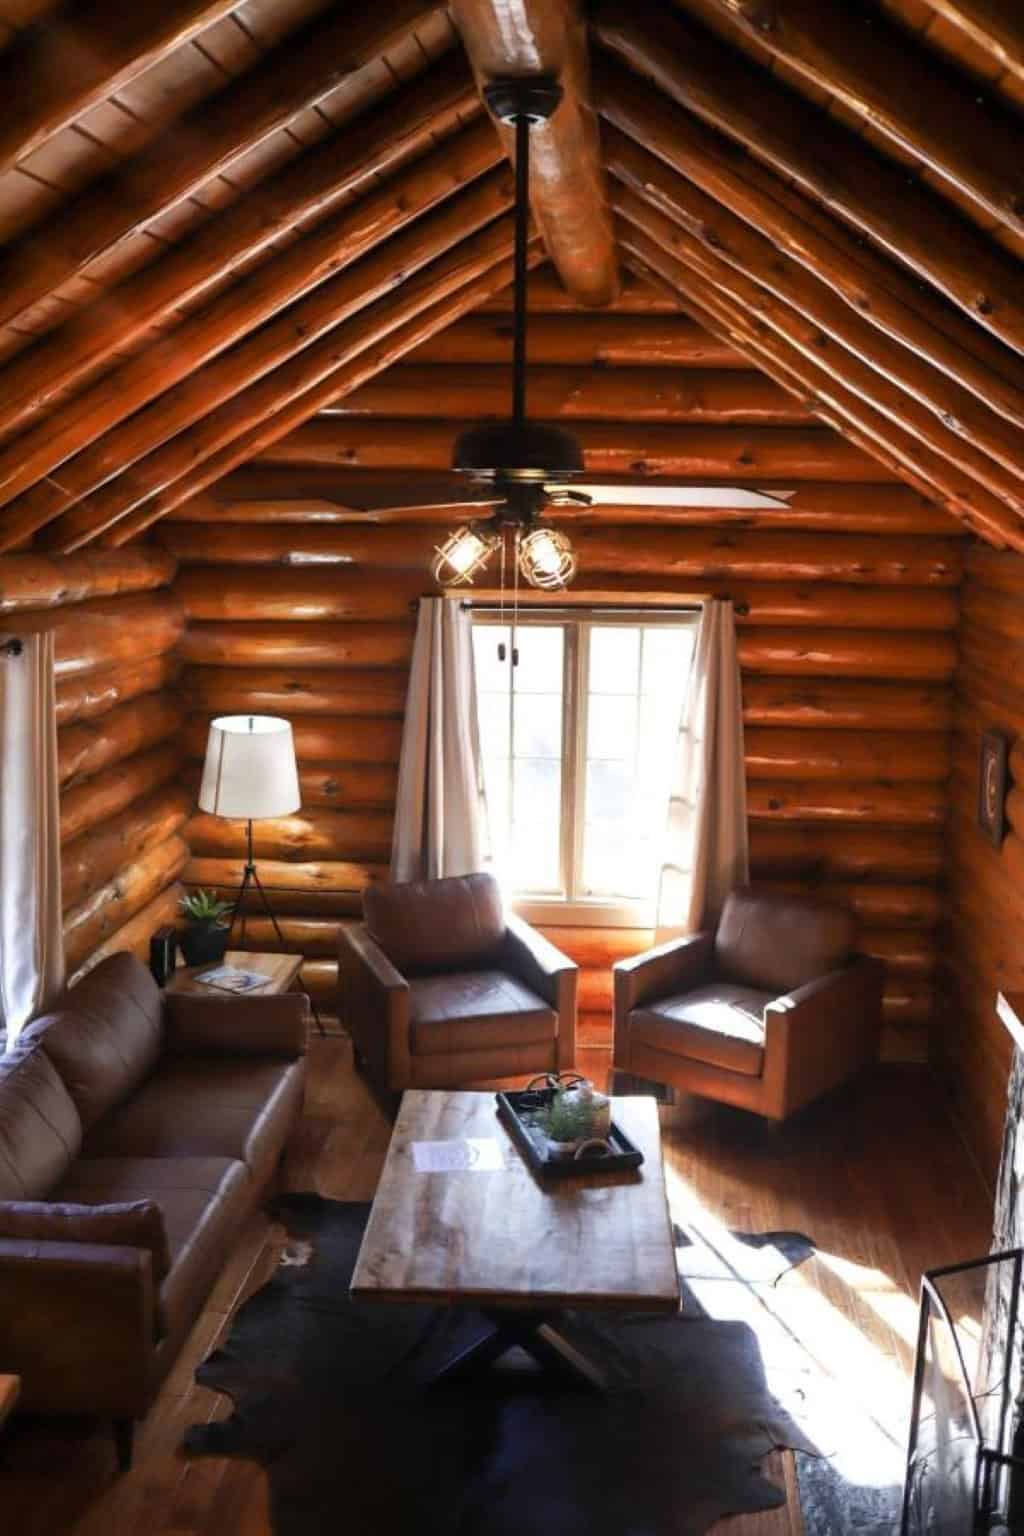 Historic Log Cabin #14 at Bearded Buffalo Resort - a cozy, newly renovated and relaxing accommodation providing a home-away-from-home stay